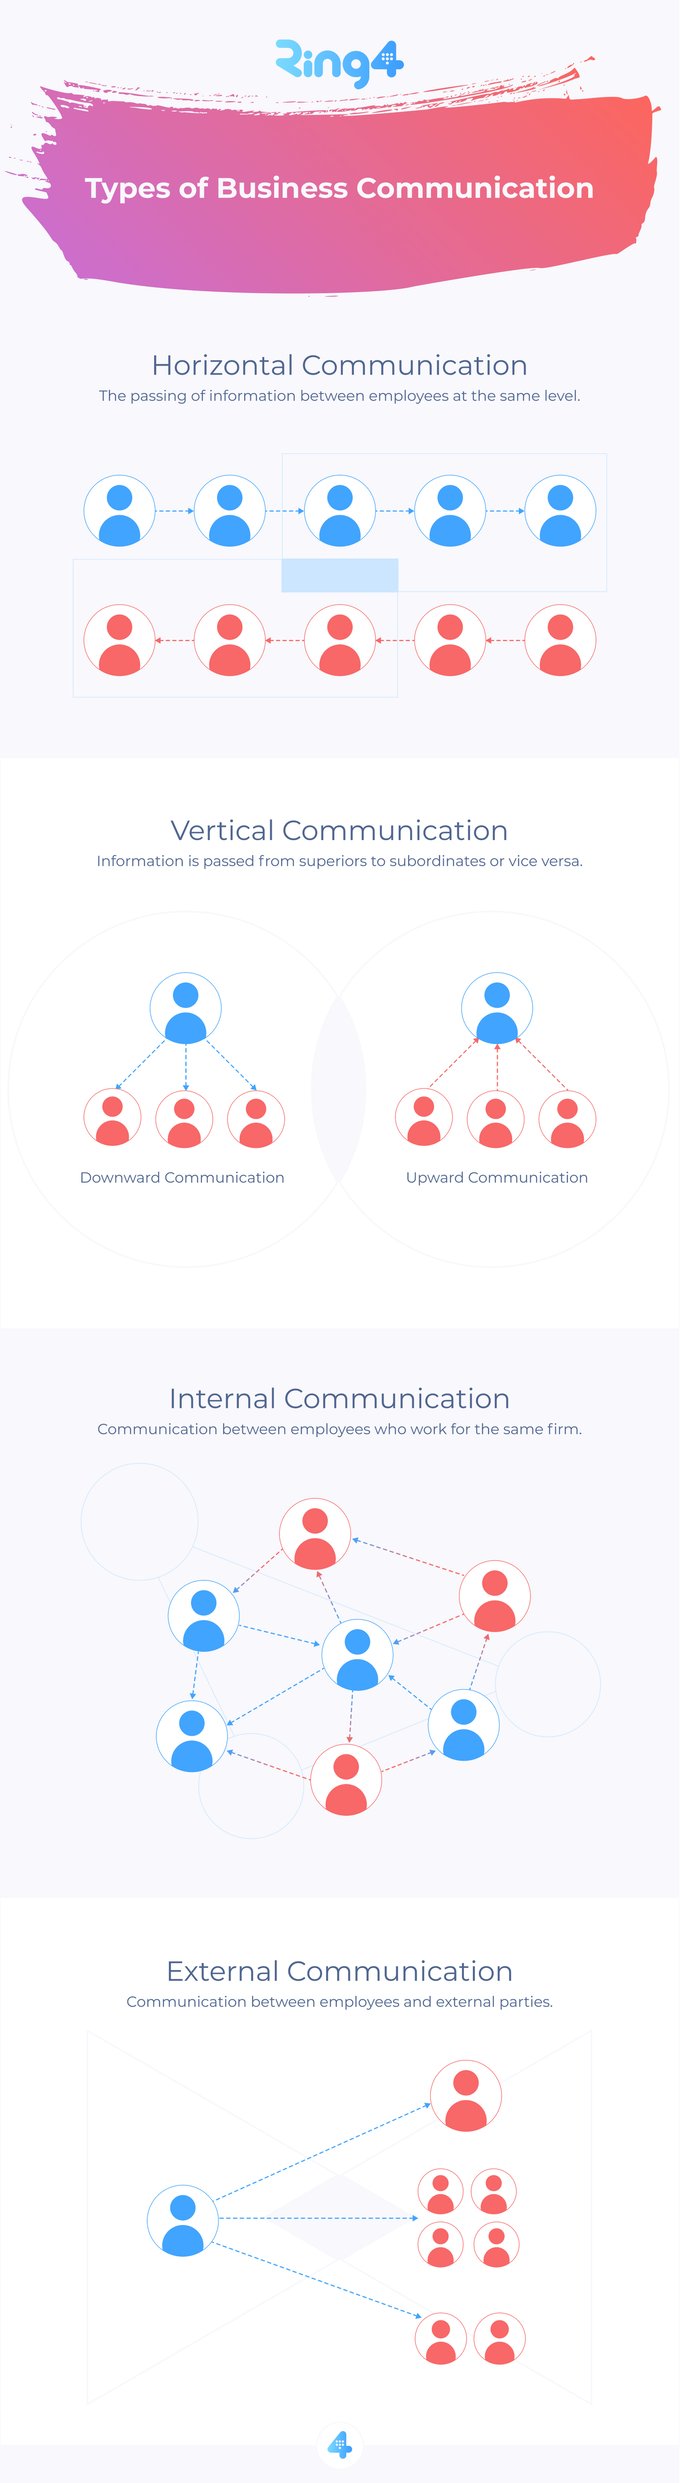 Ring4-Types-of-Business-Communication-Infographic-2